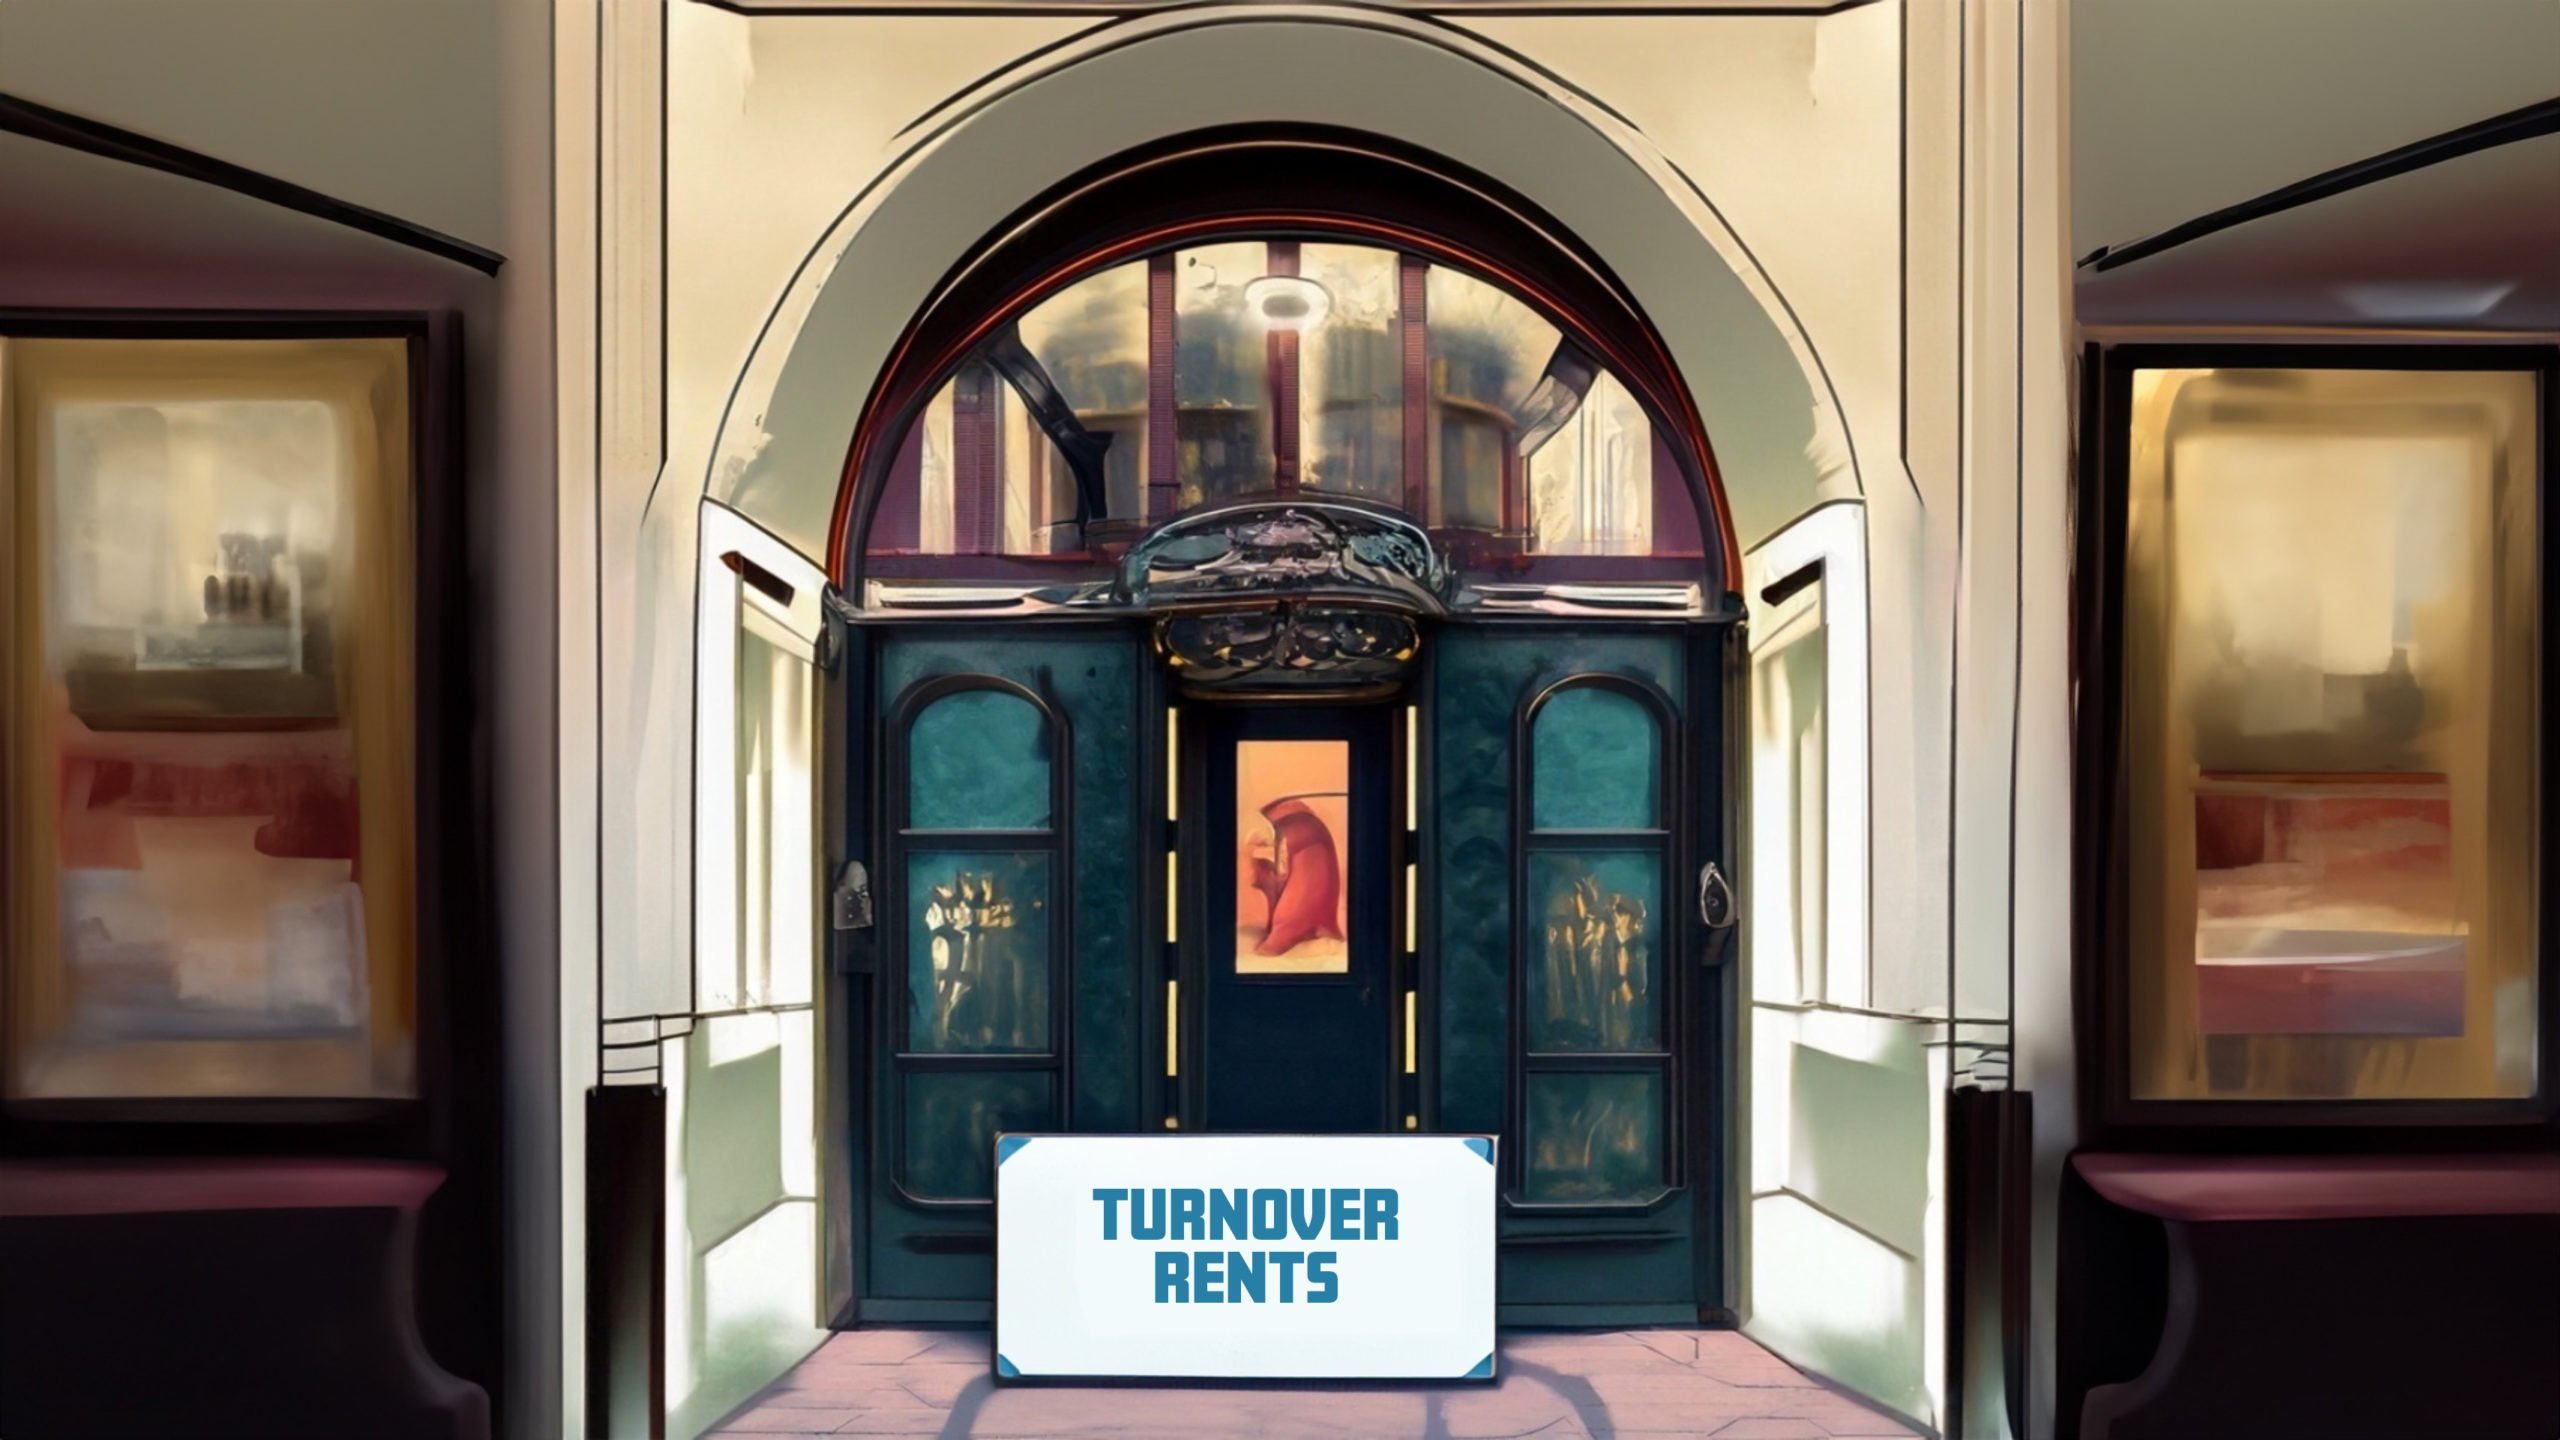 The Benefits of Increasing use of turnover rents